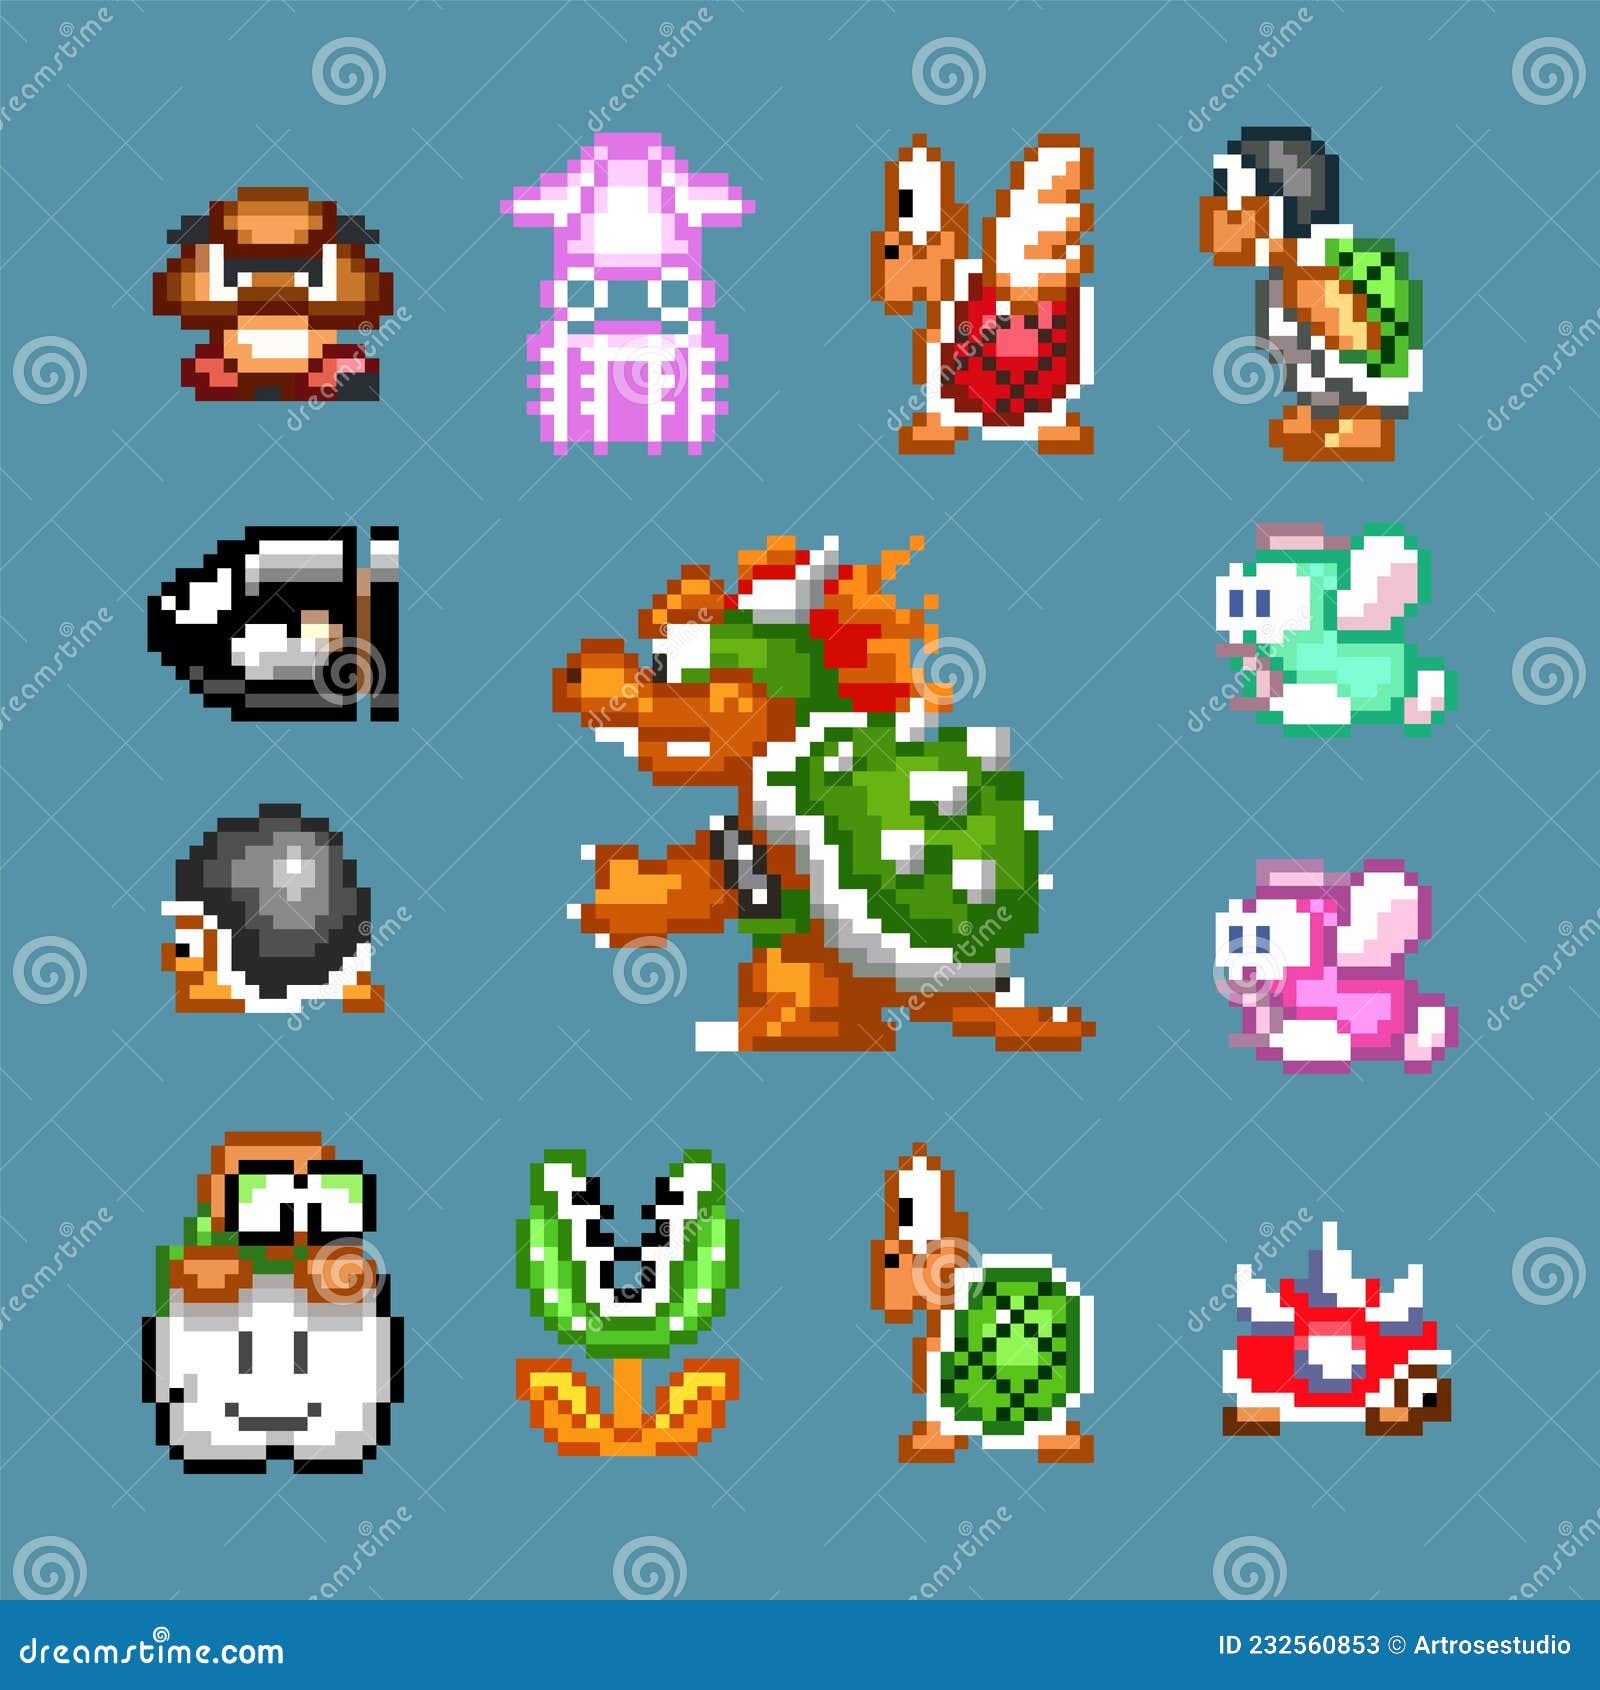 Super Mario Game Vector Art, Icons, and Graphics for Free Download